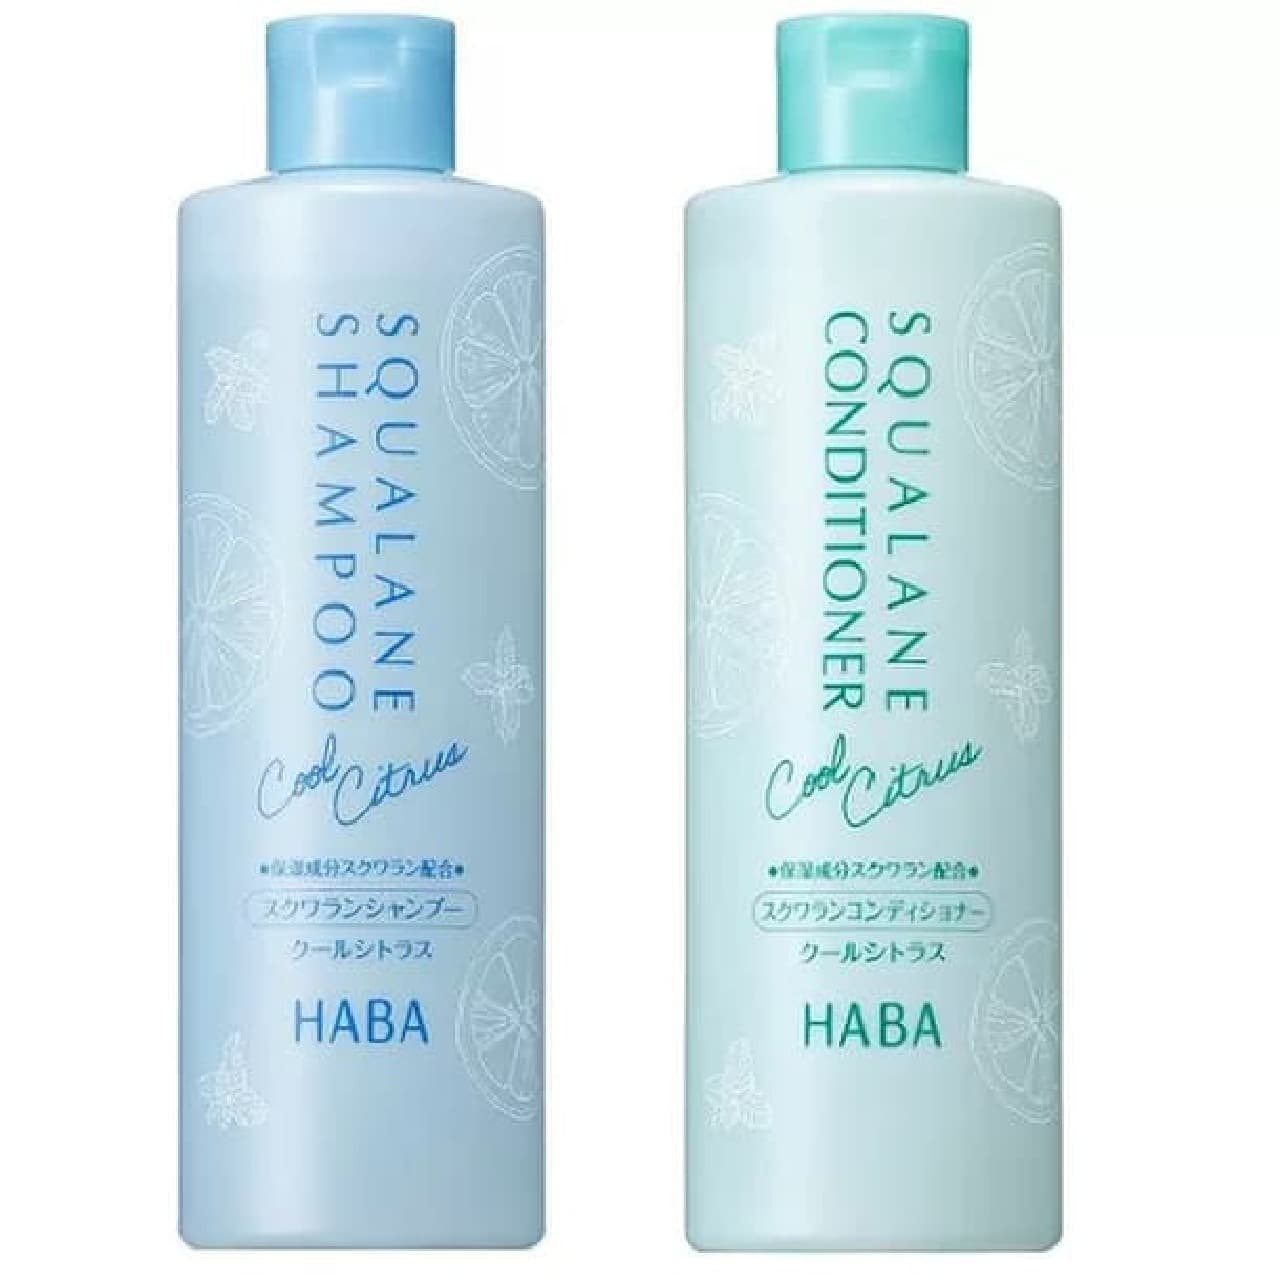 HARBOR LABORATORY launches "Squalane Shampoo and Conditioner Cool Citrus" for summer in limited quantities from May 21, 2024 Image 1